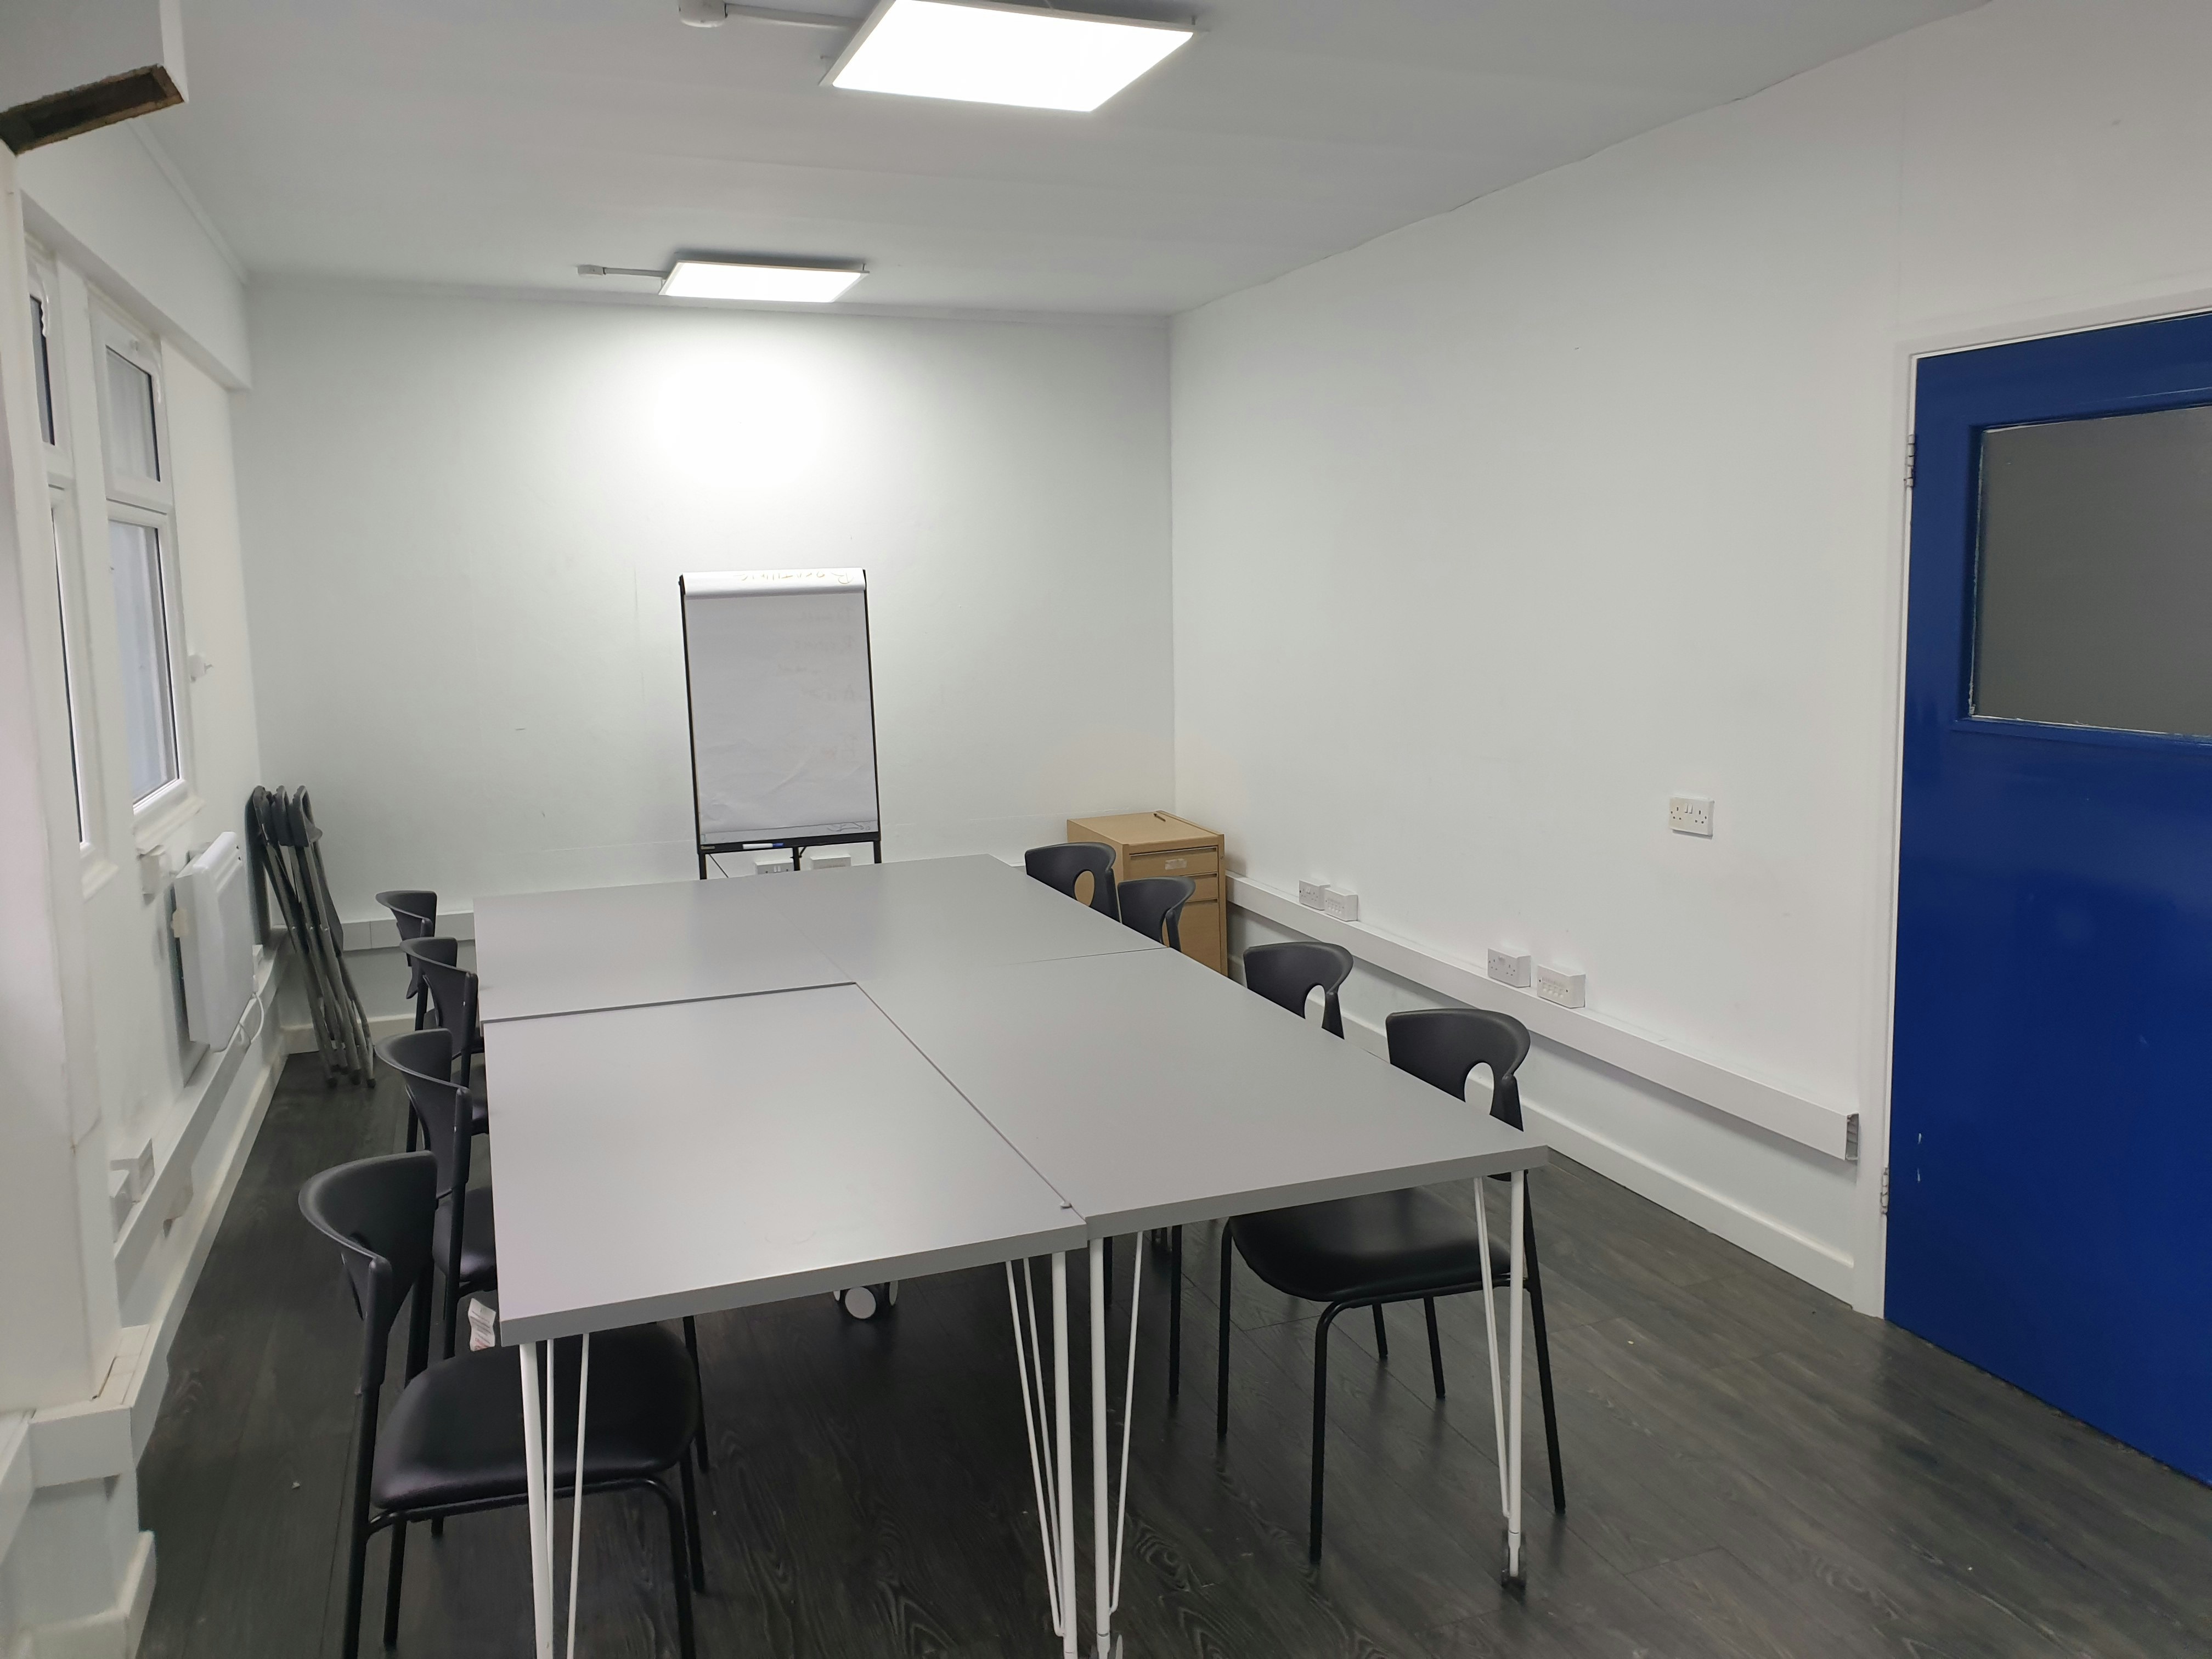 Colombo Sports & Community Centre - Office/Training Room 2 image 5